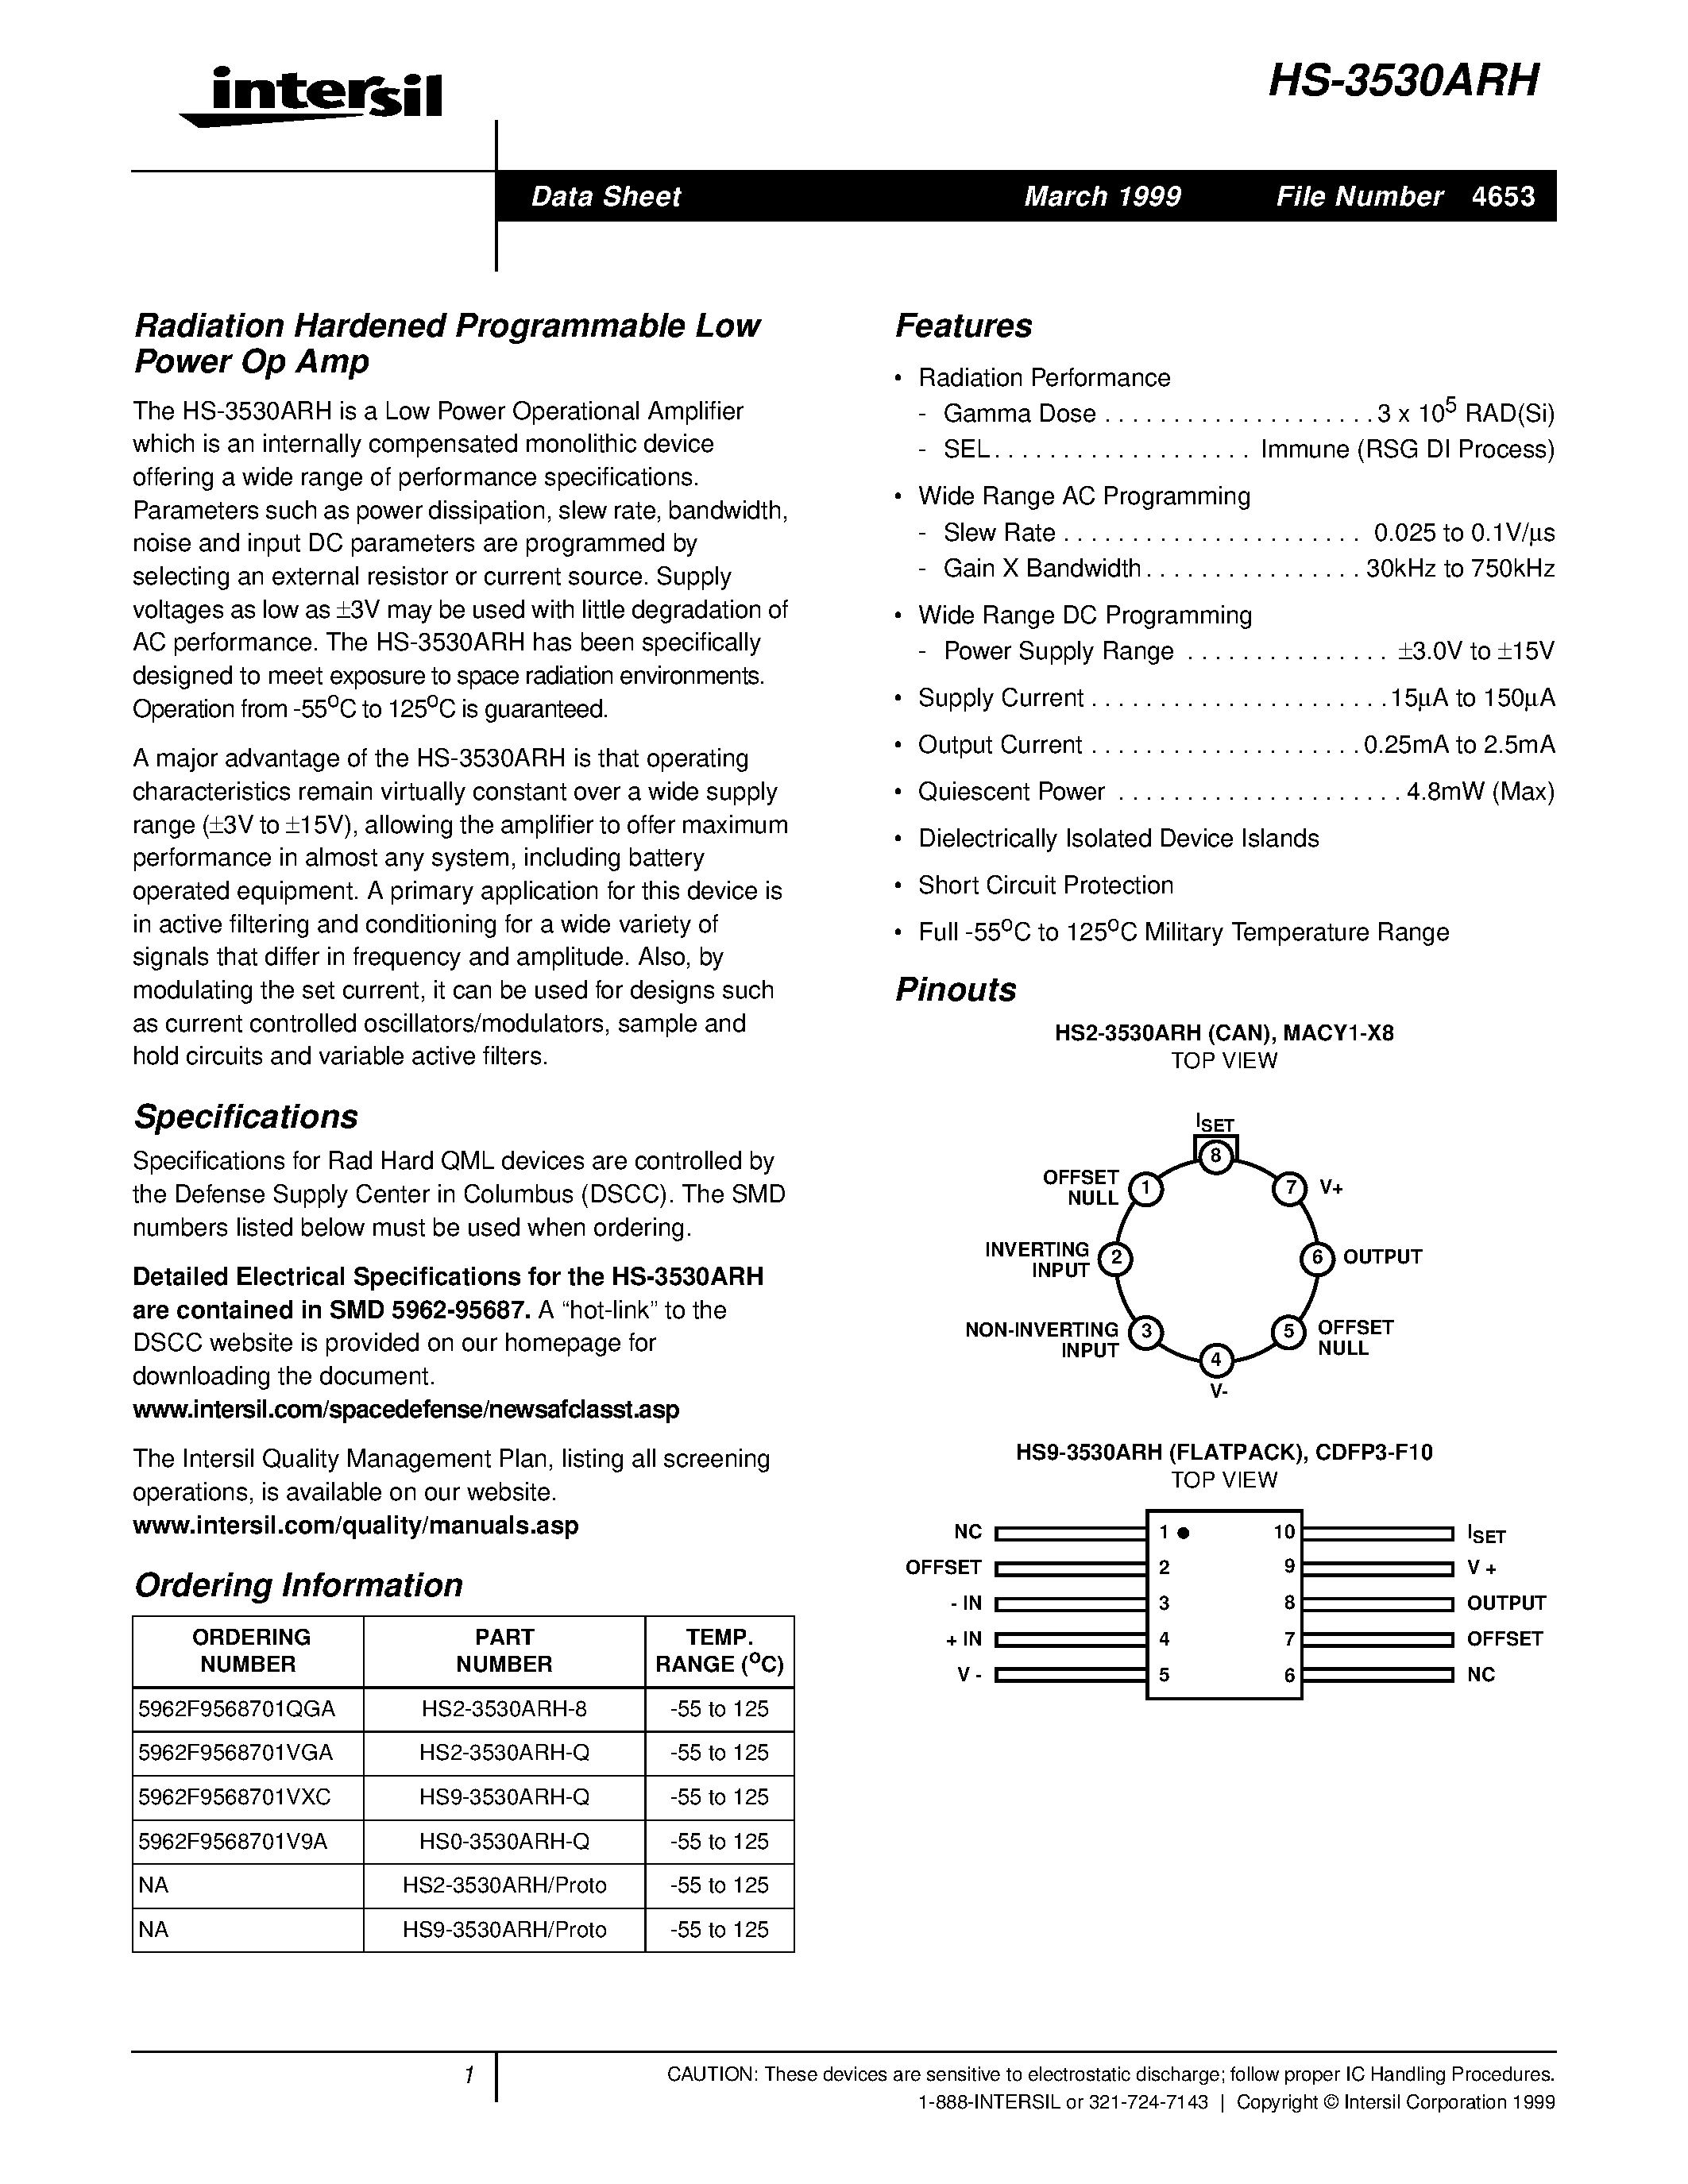 Datasheet HS2-3530ARH-Q - Radiation Hardened Programmable Low Power Op Amp page 1